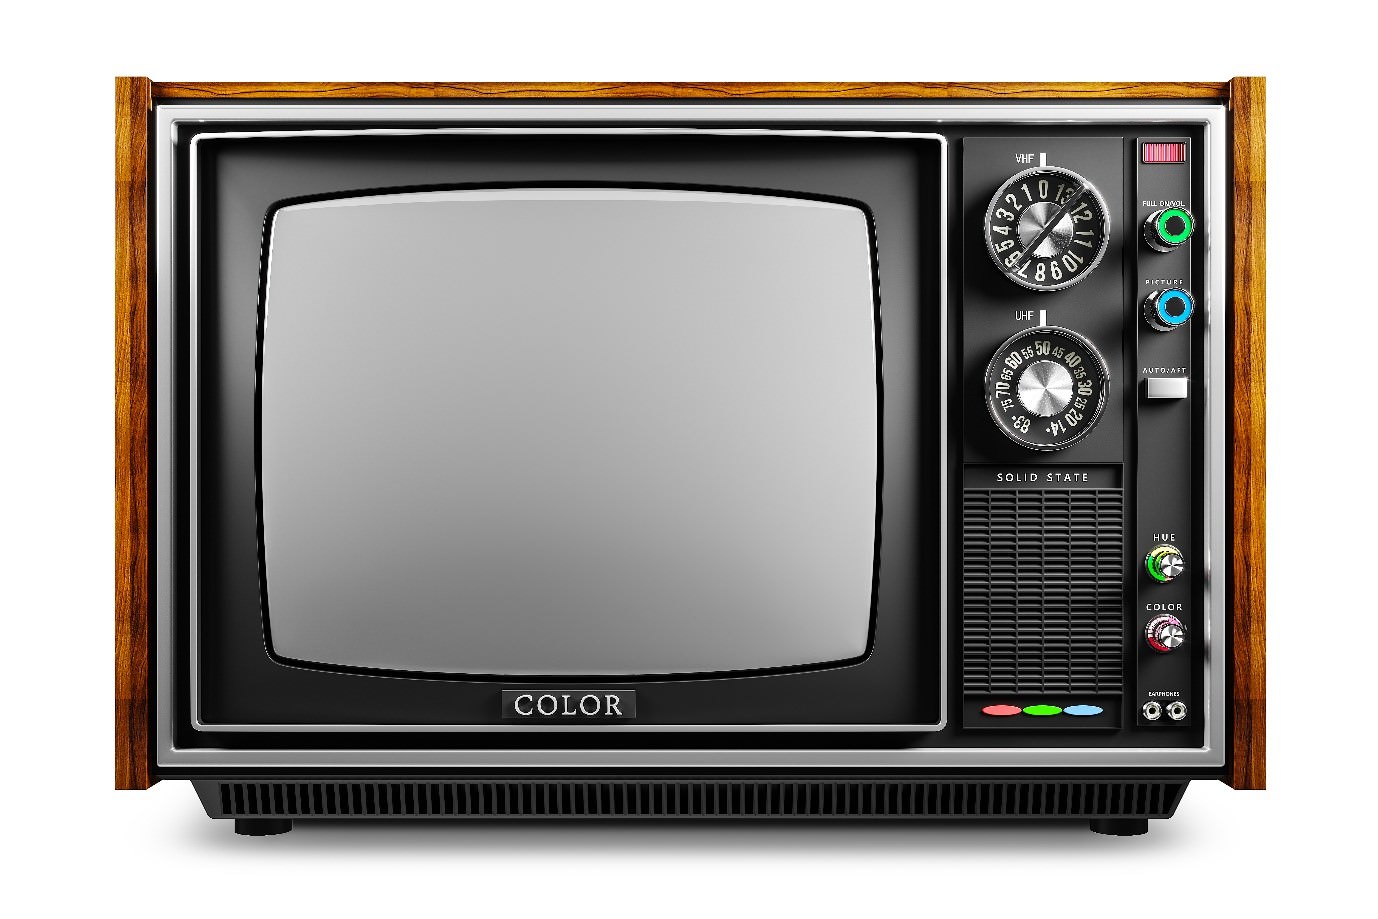 old television - history of the tv